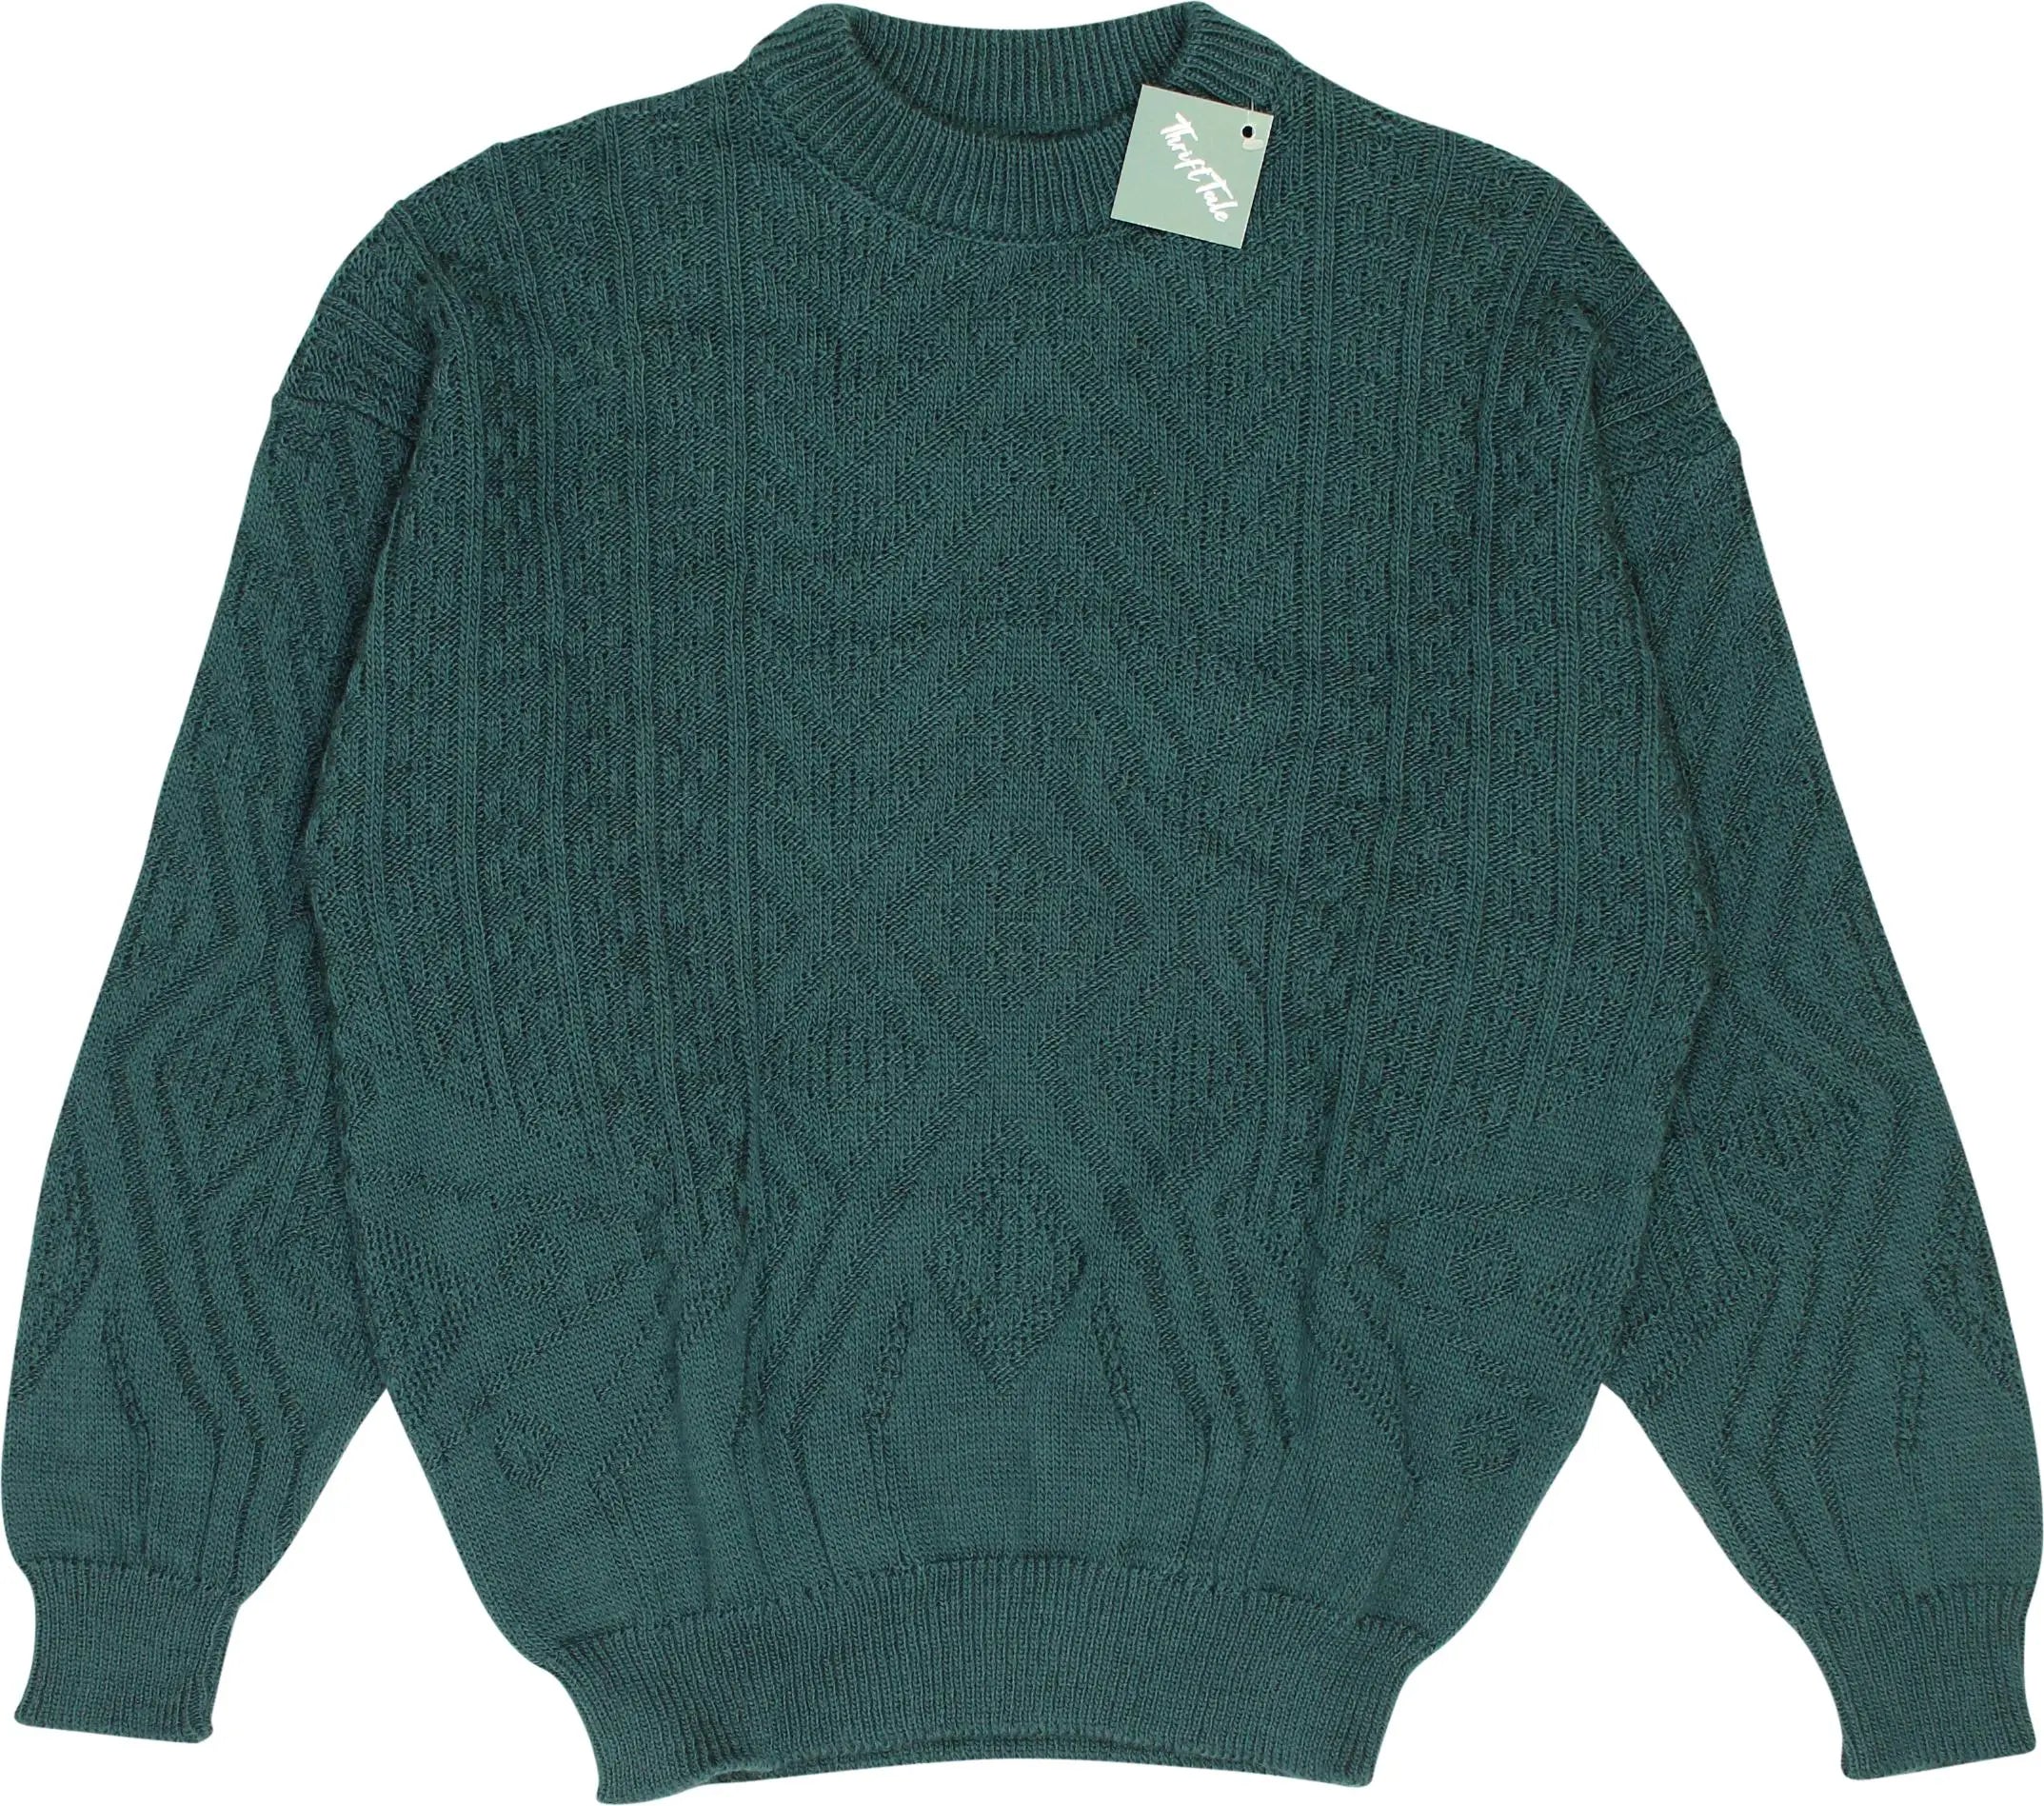 Unknown - Green Wool Blend Jumper- ThriftTale.com - Vintage and second handclothing